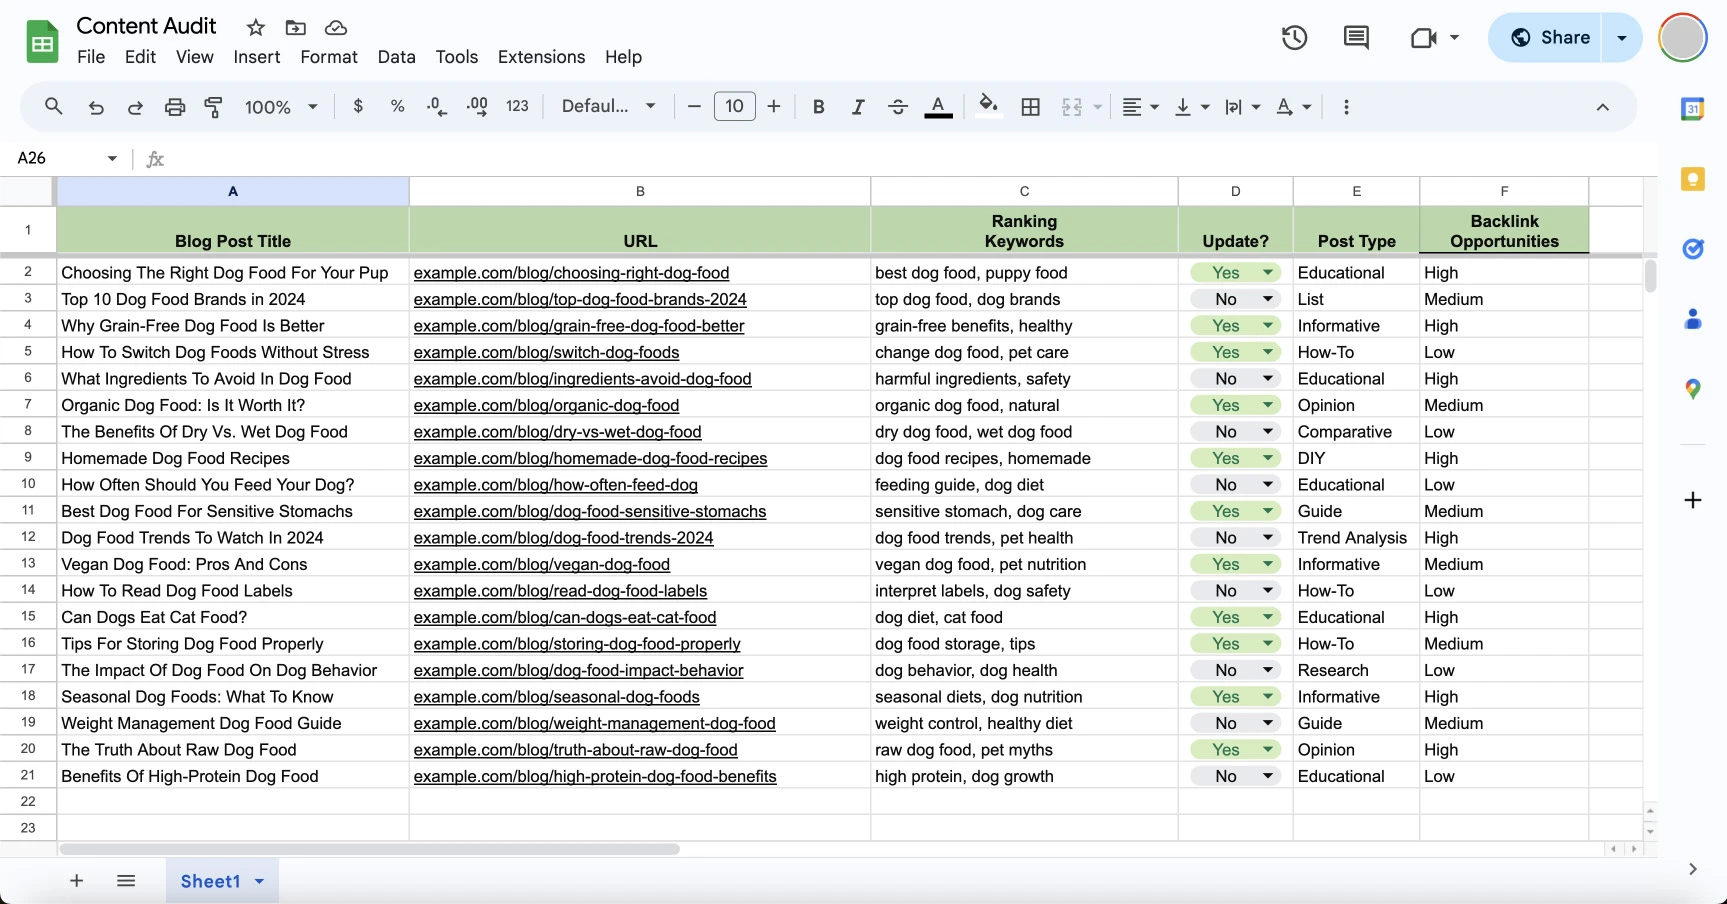 A filled-in Google Sheet "Content Audit" with columns for blog post titles, URLs, status, and backlink opportunities. 